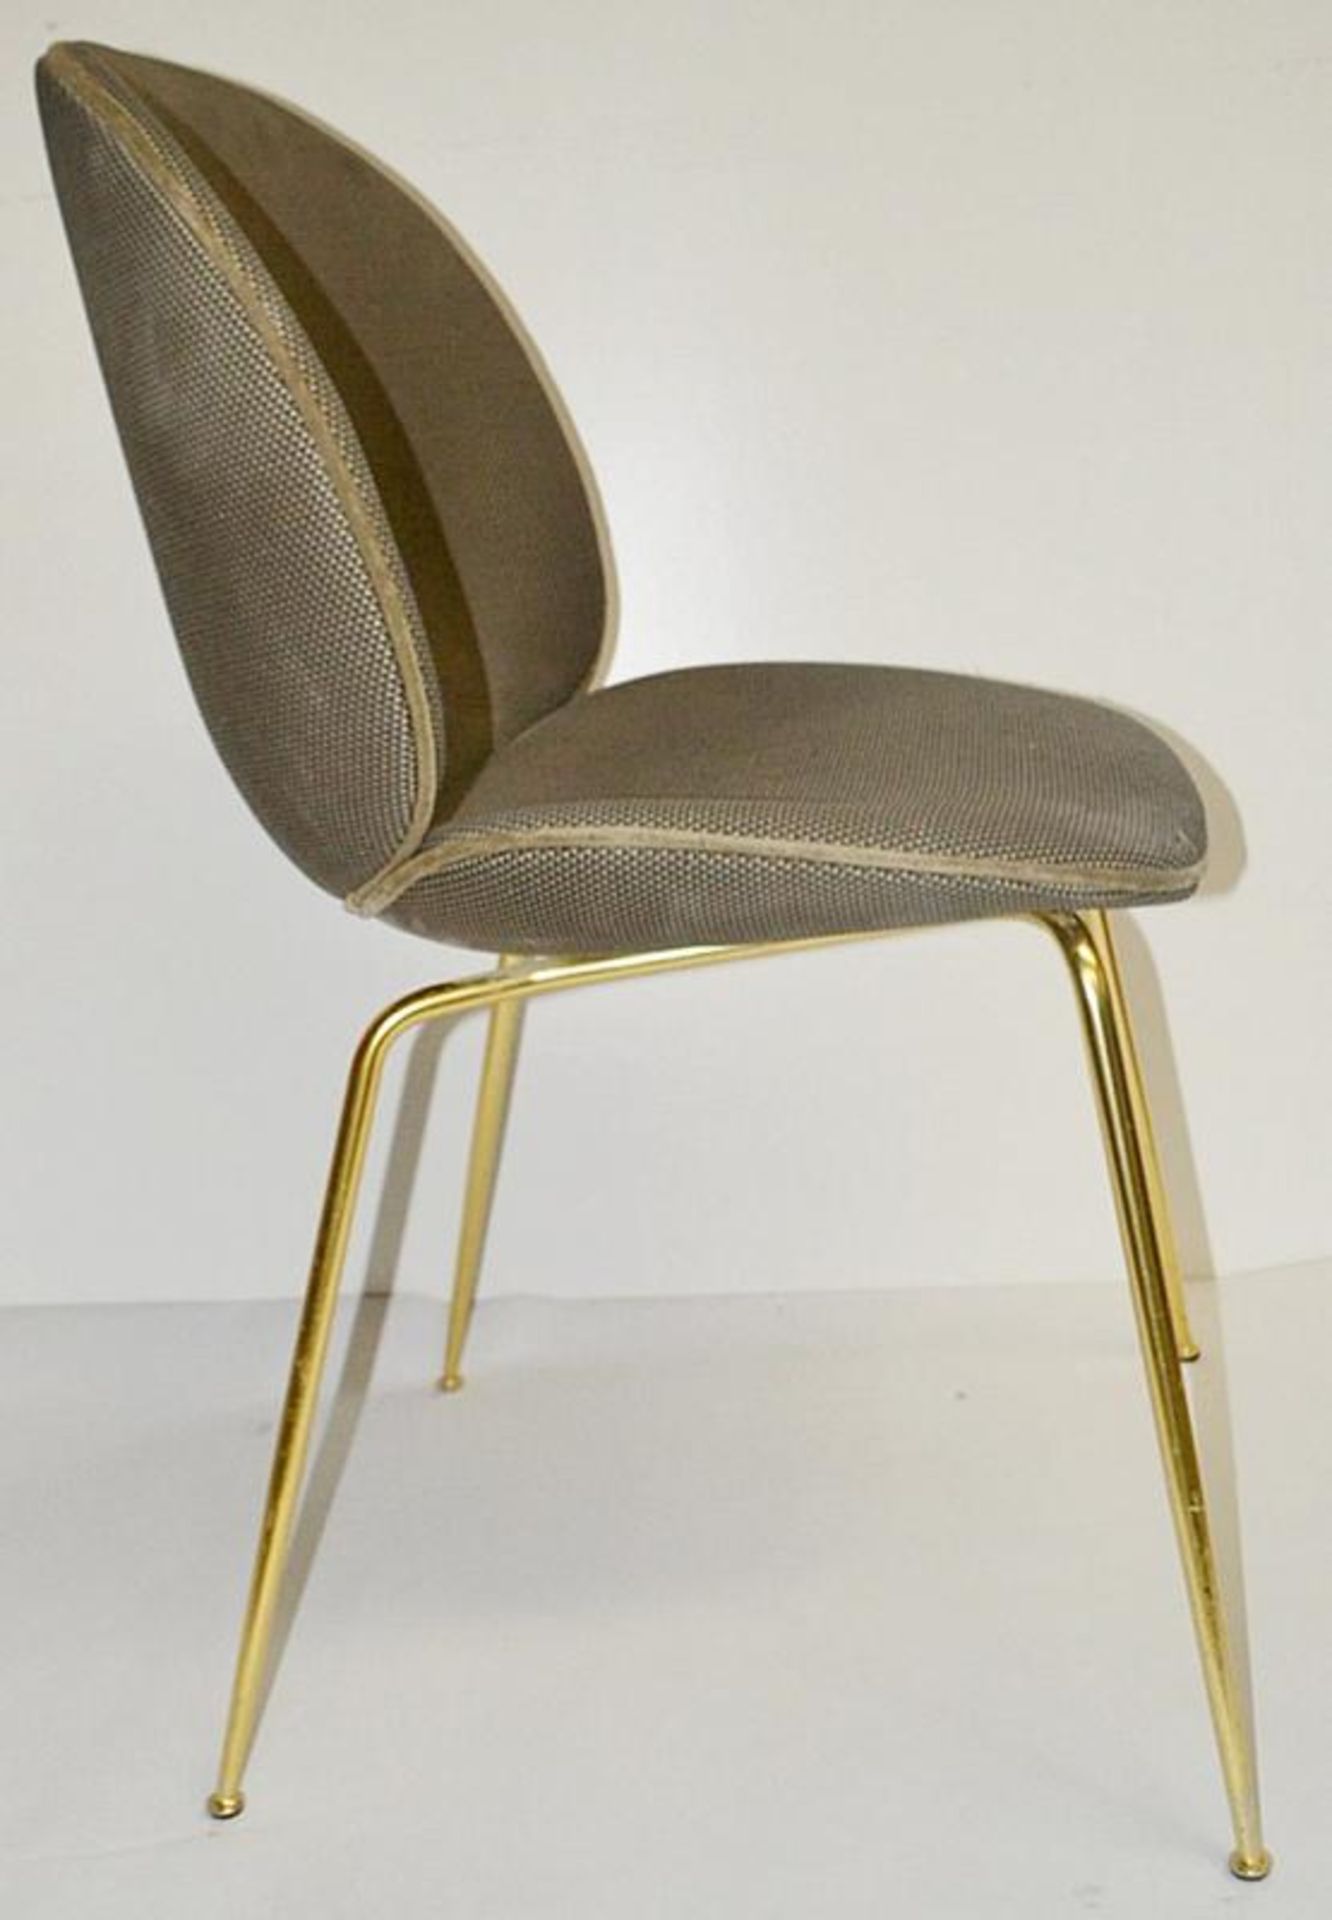 1 x GUBI 'Beetle Chair' - Designed By GamFratesi - Used, Please Read Condition Report - Dimensions: - Image 2 of 6